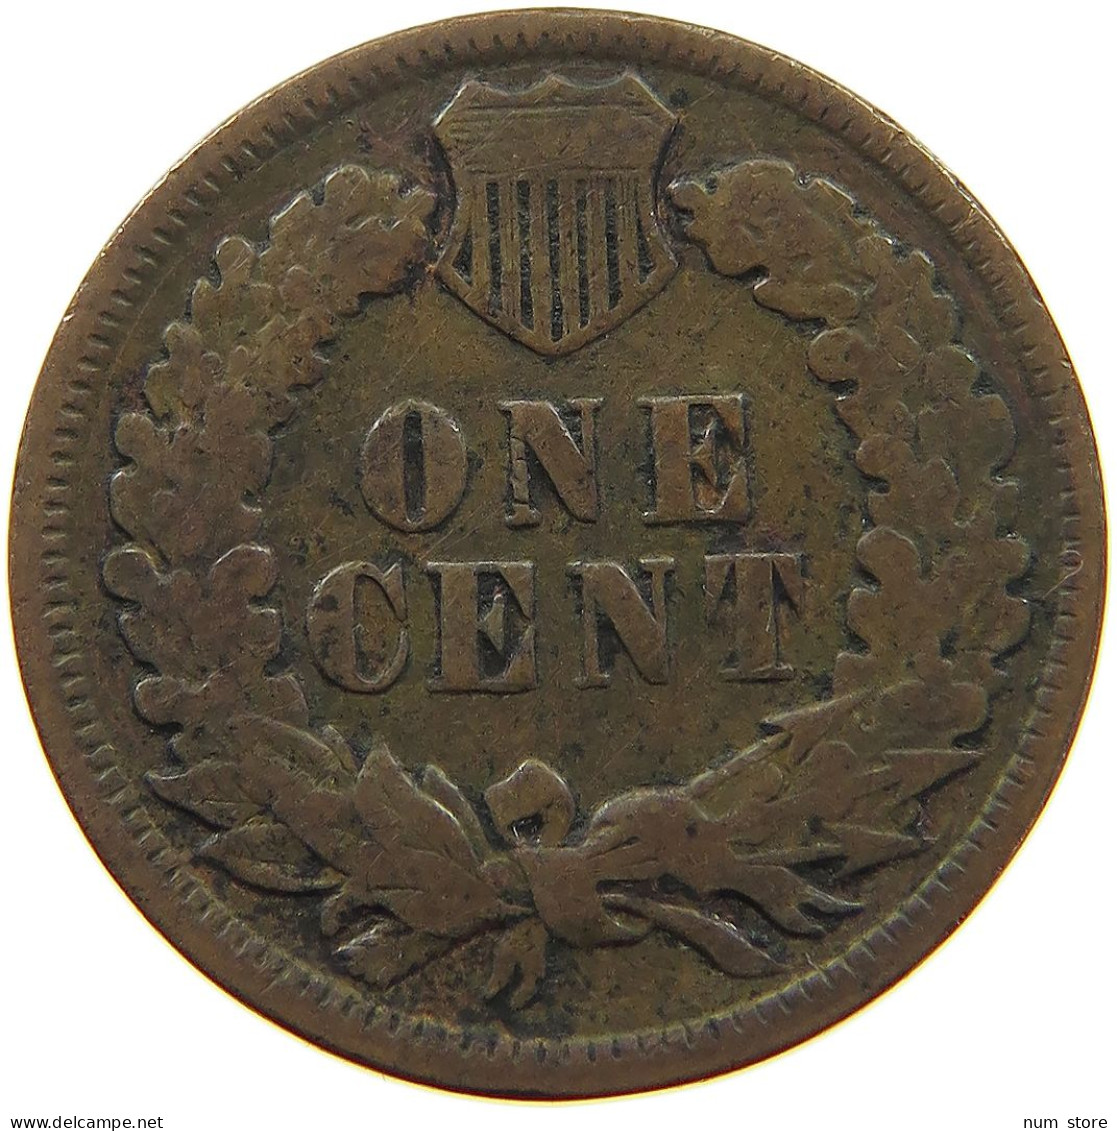 UNITED STATES OF AMERICA CENT 1891 INDIAN HEAD #a013 0361 - 1859-1909: Indian Head